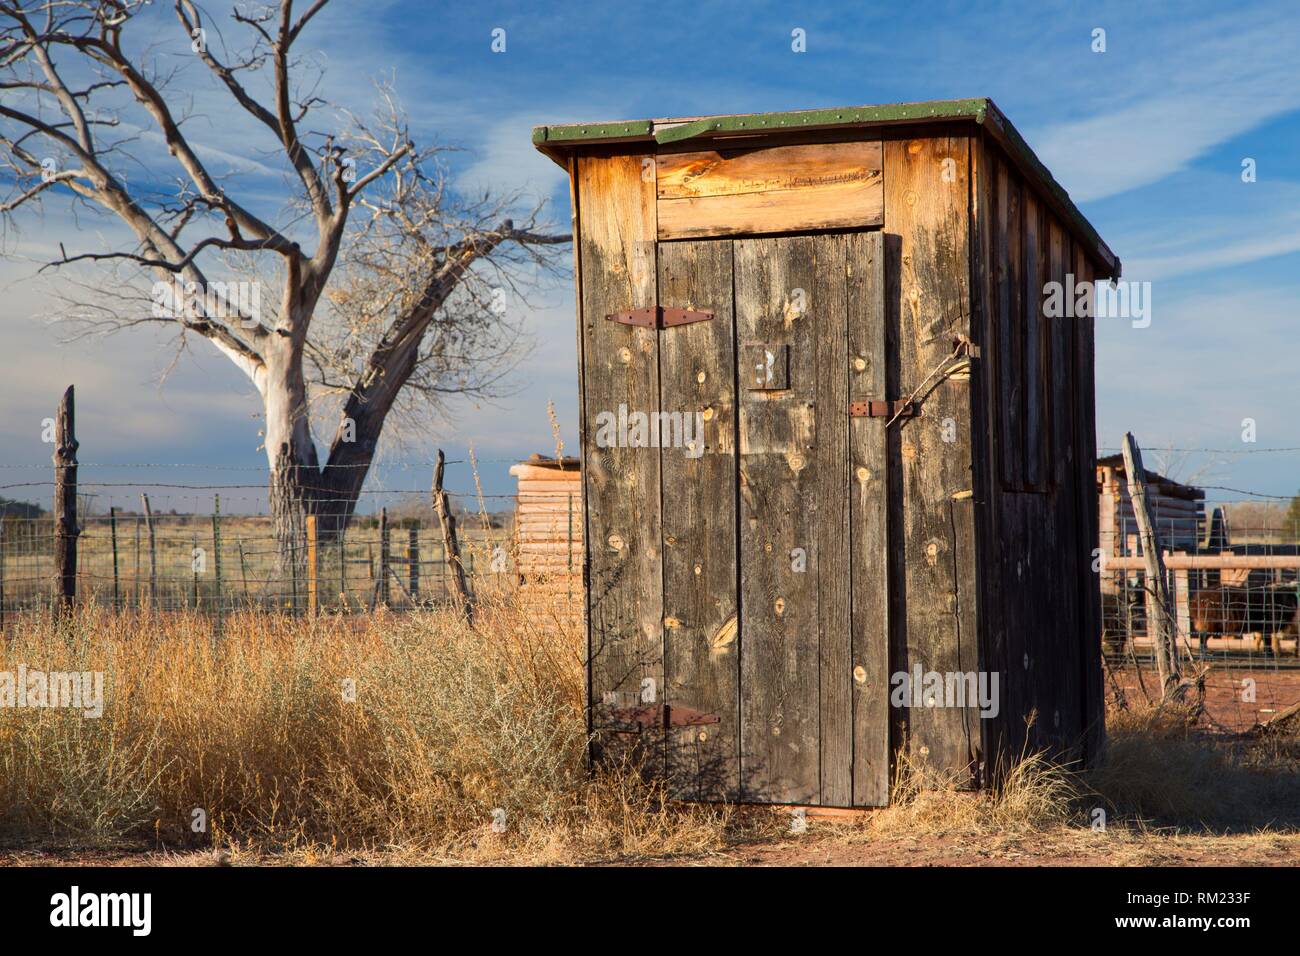 Outhouse, Hubbell Trading Post National Historic Site, Arizona. Stock Photo